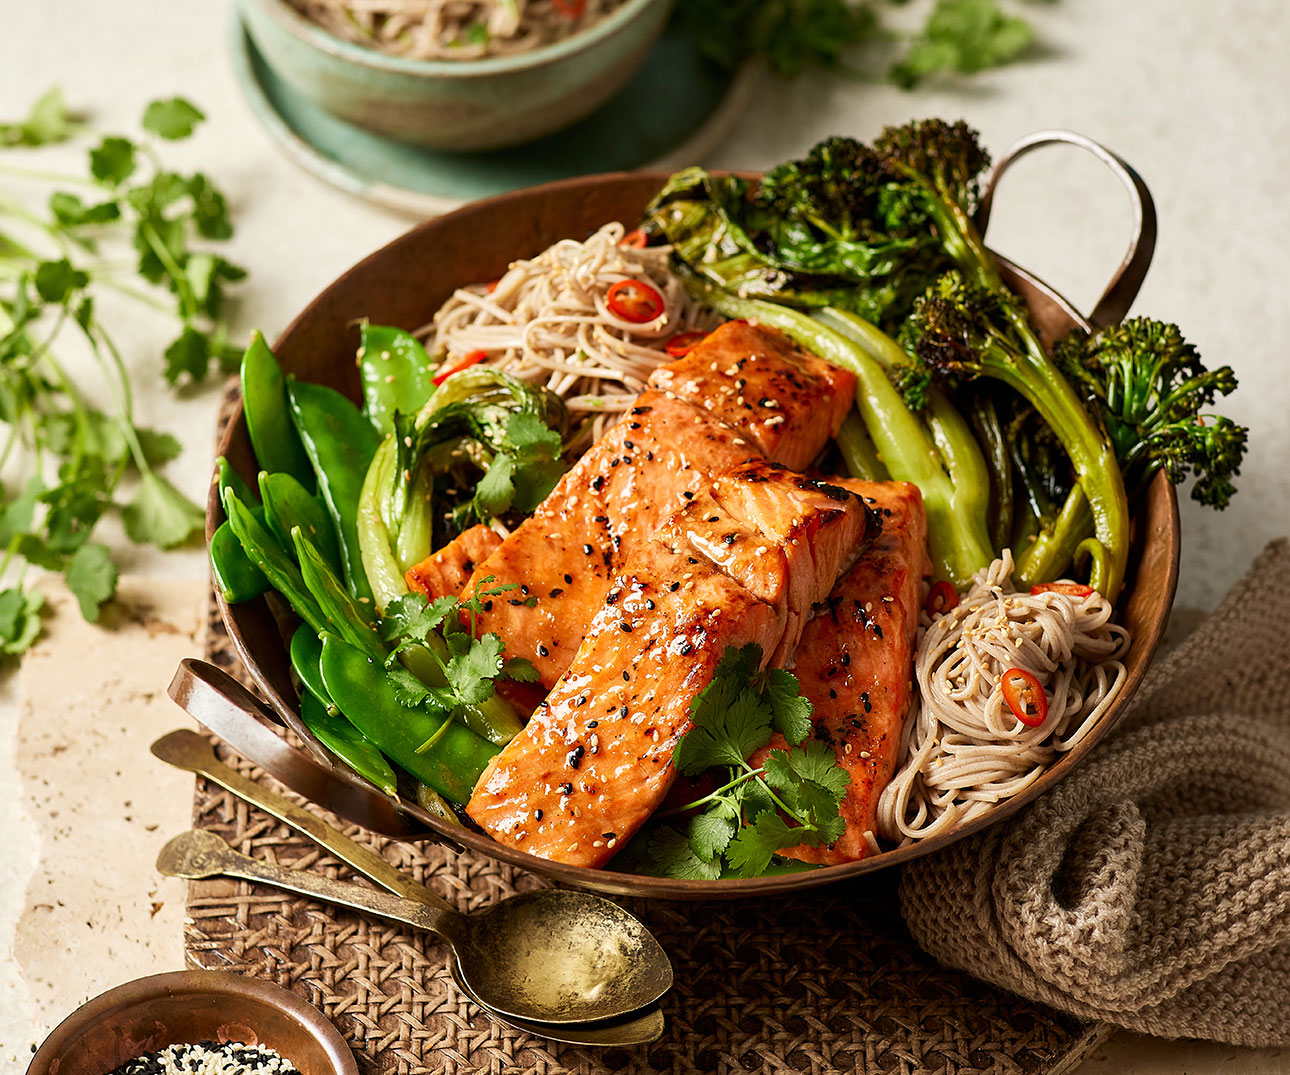 Baked Ocean Trout With Sesame, Soba Noodles And Seasonal Asian Greens